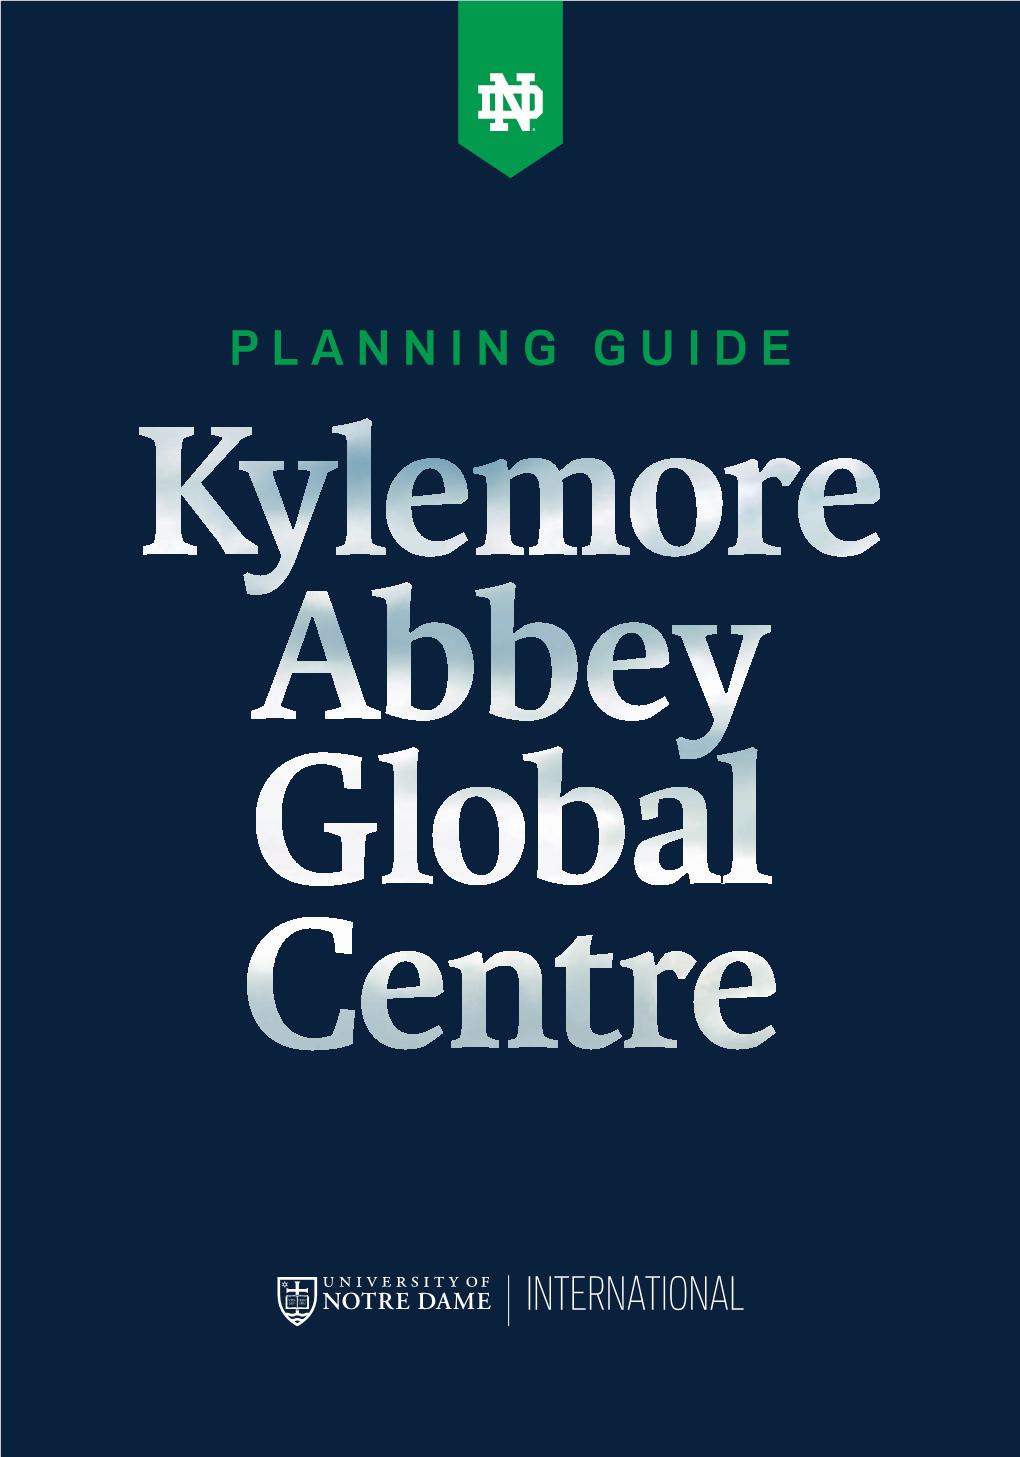 Download the Kylemore Abbey Global Centre Planning Guide